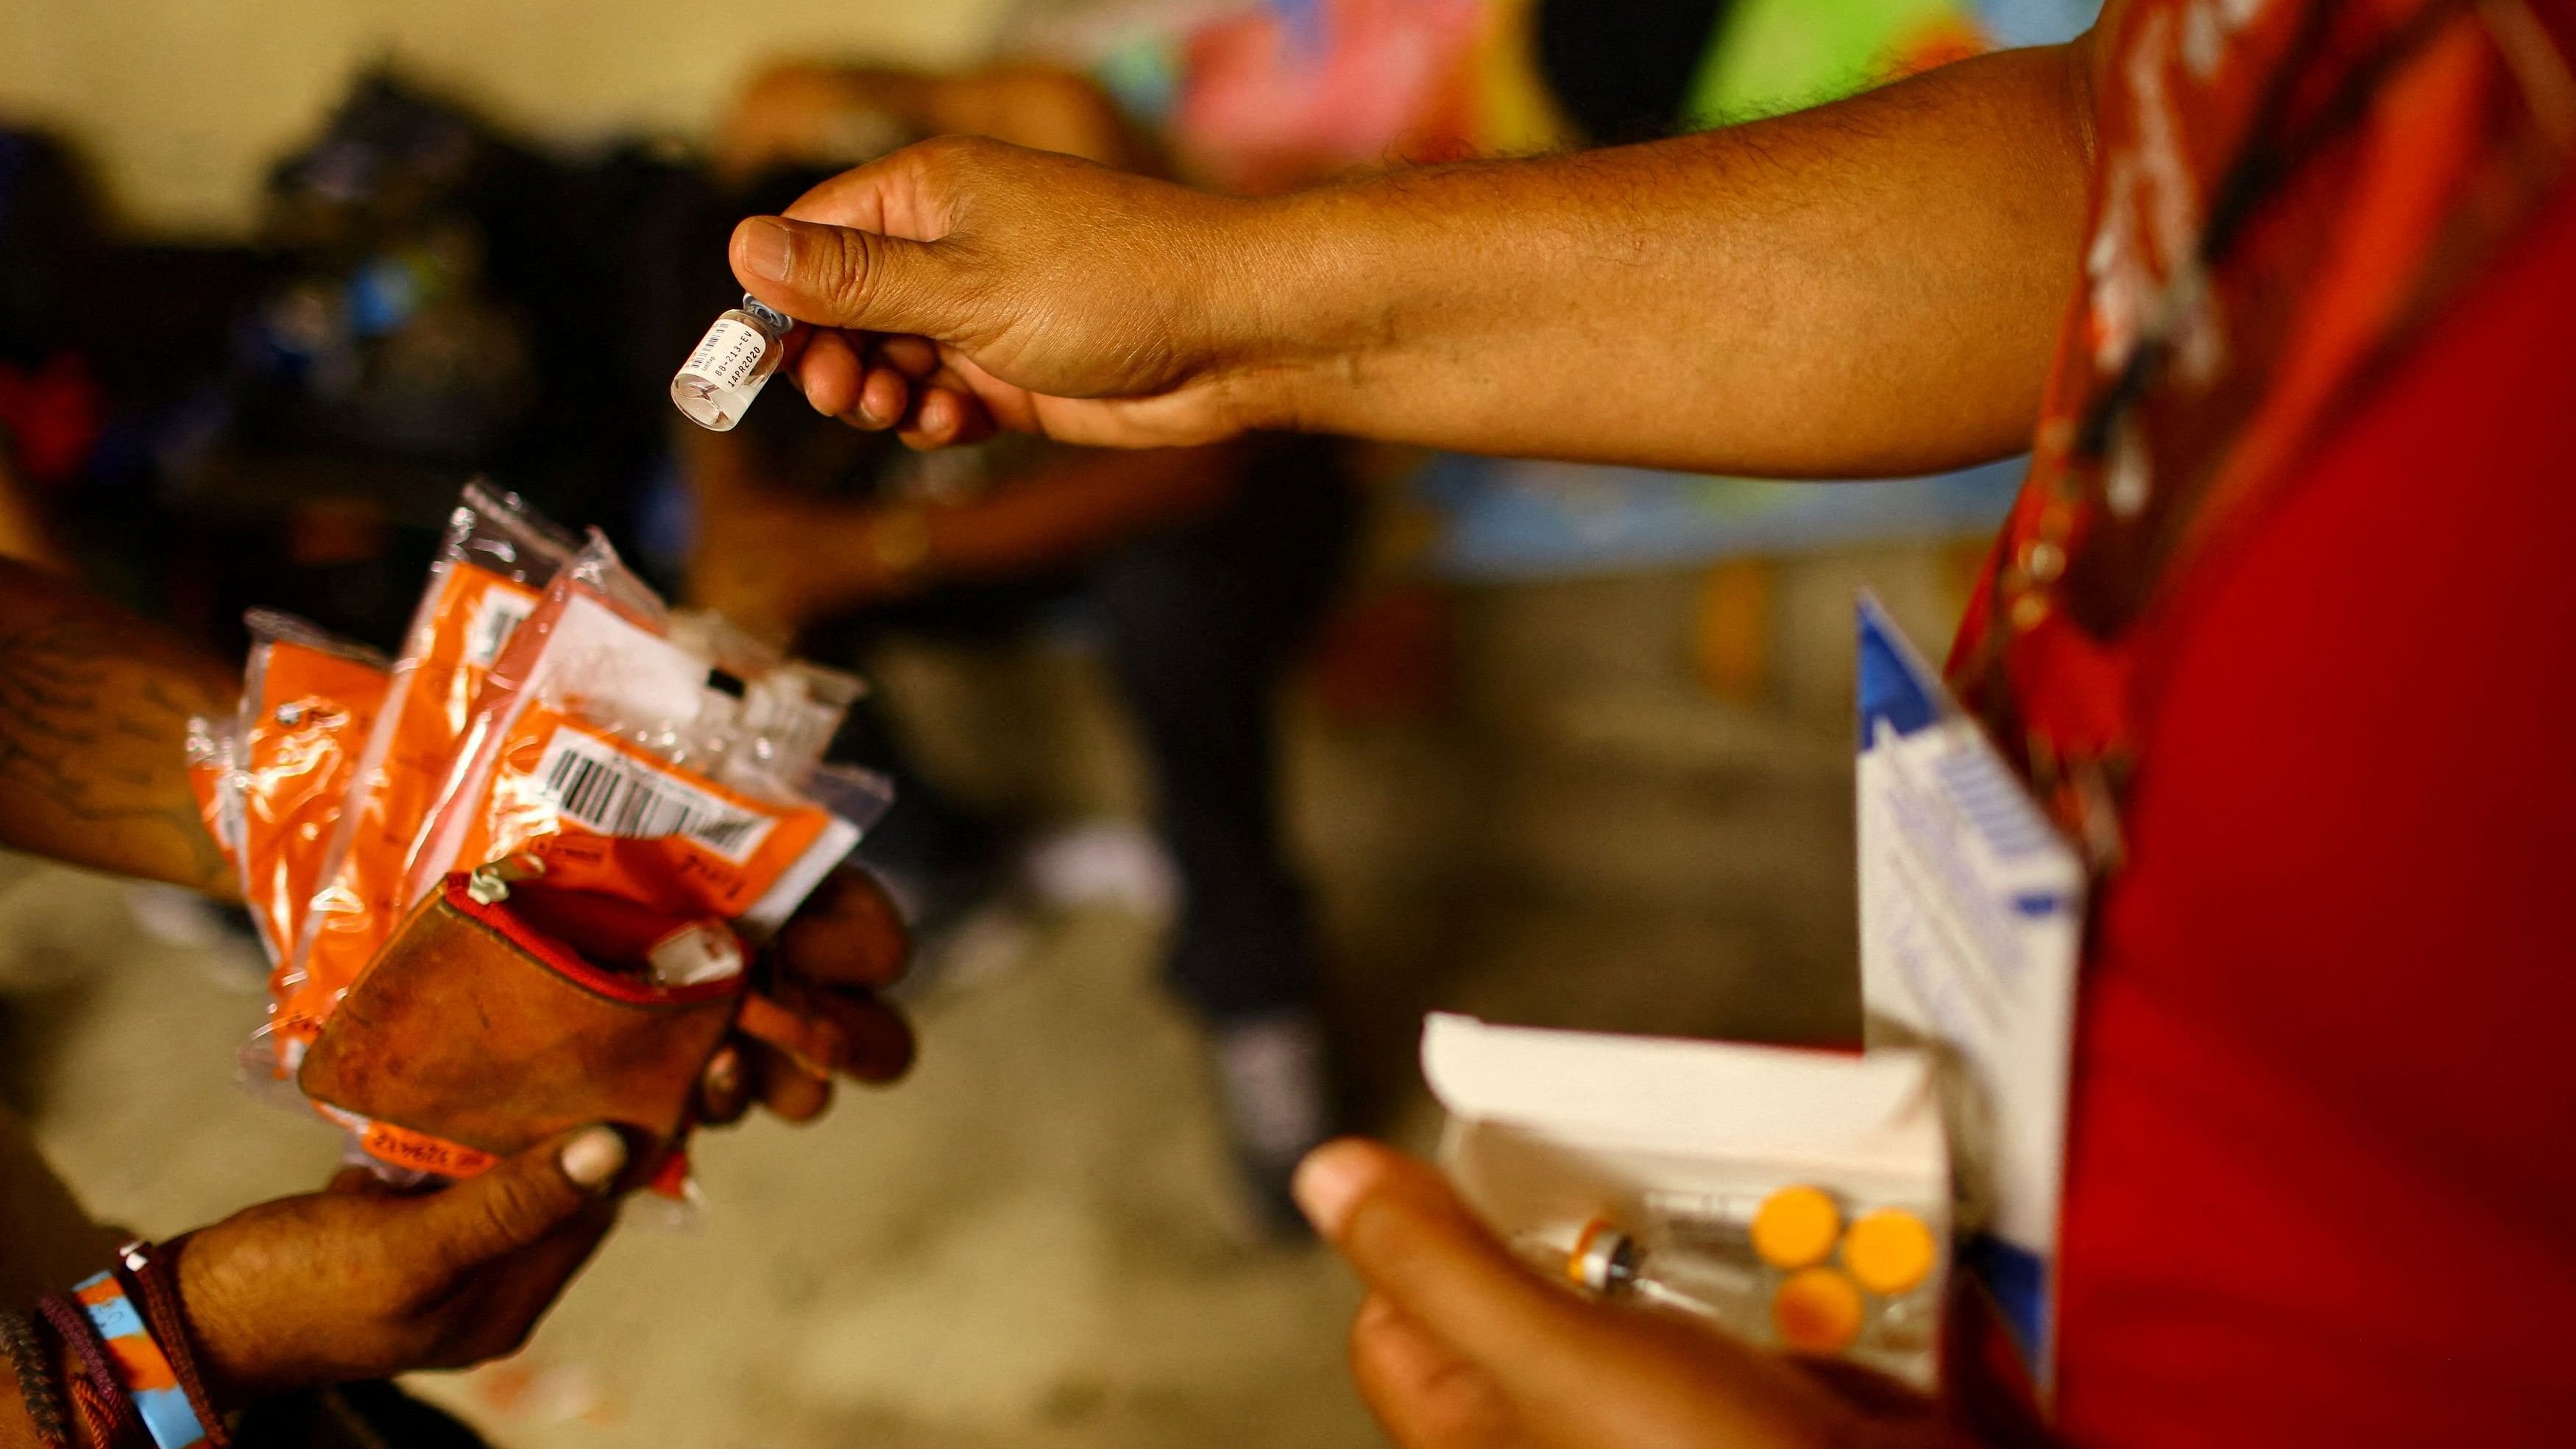 <div class="paragraphs"><p>Health worker hands out Naloxone, used to rapidly reverse opioid overdose. Representative image.</p></div>